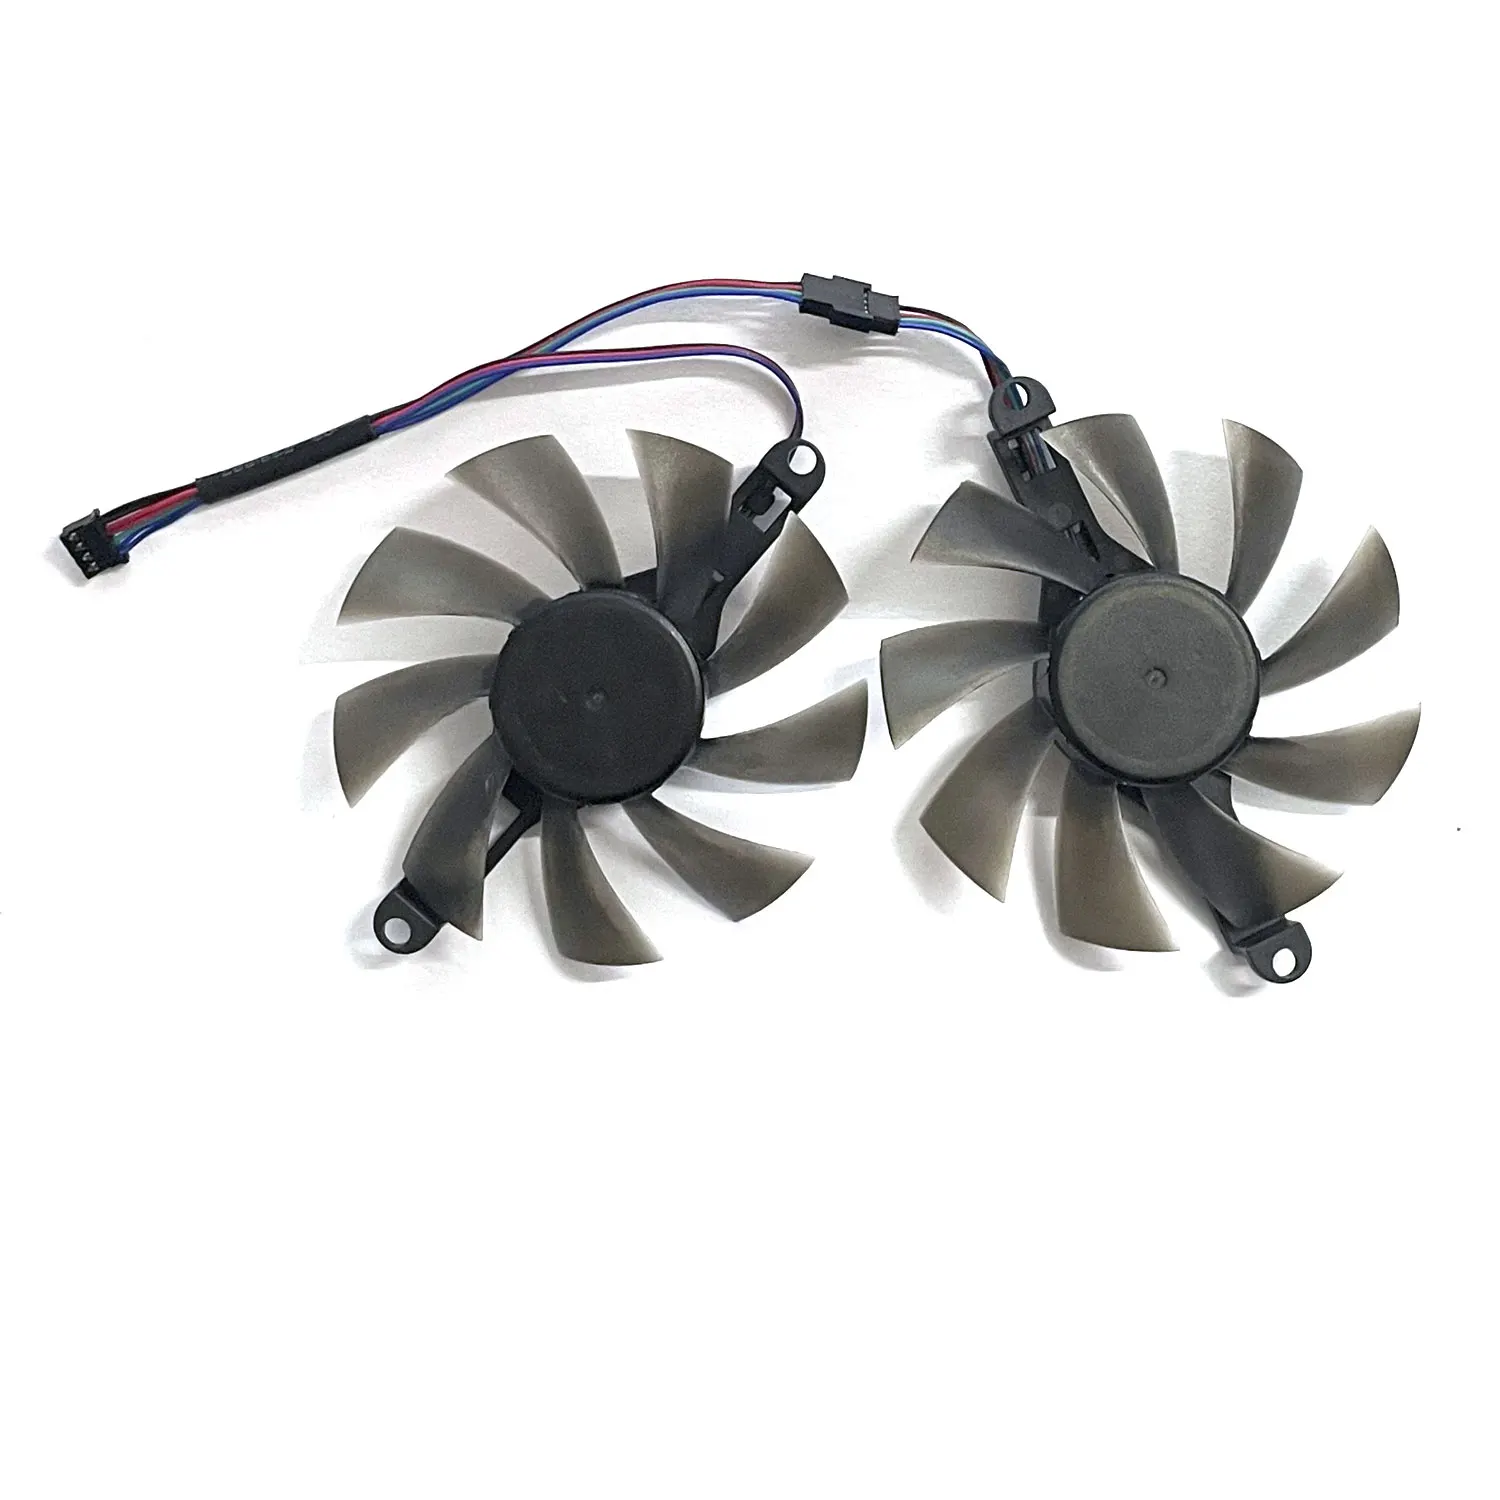 2Pcs/Set 85MM 6600M GPU Cooler Graphics Card Fan For AMD AFOX Radeon RX 580 2048SP For Colorful GTX1070ti GAMING VGA Replace